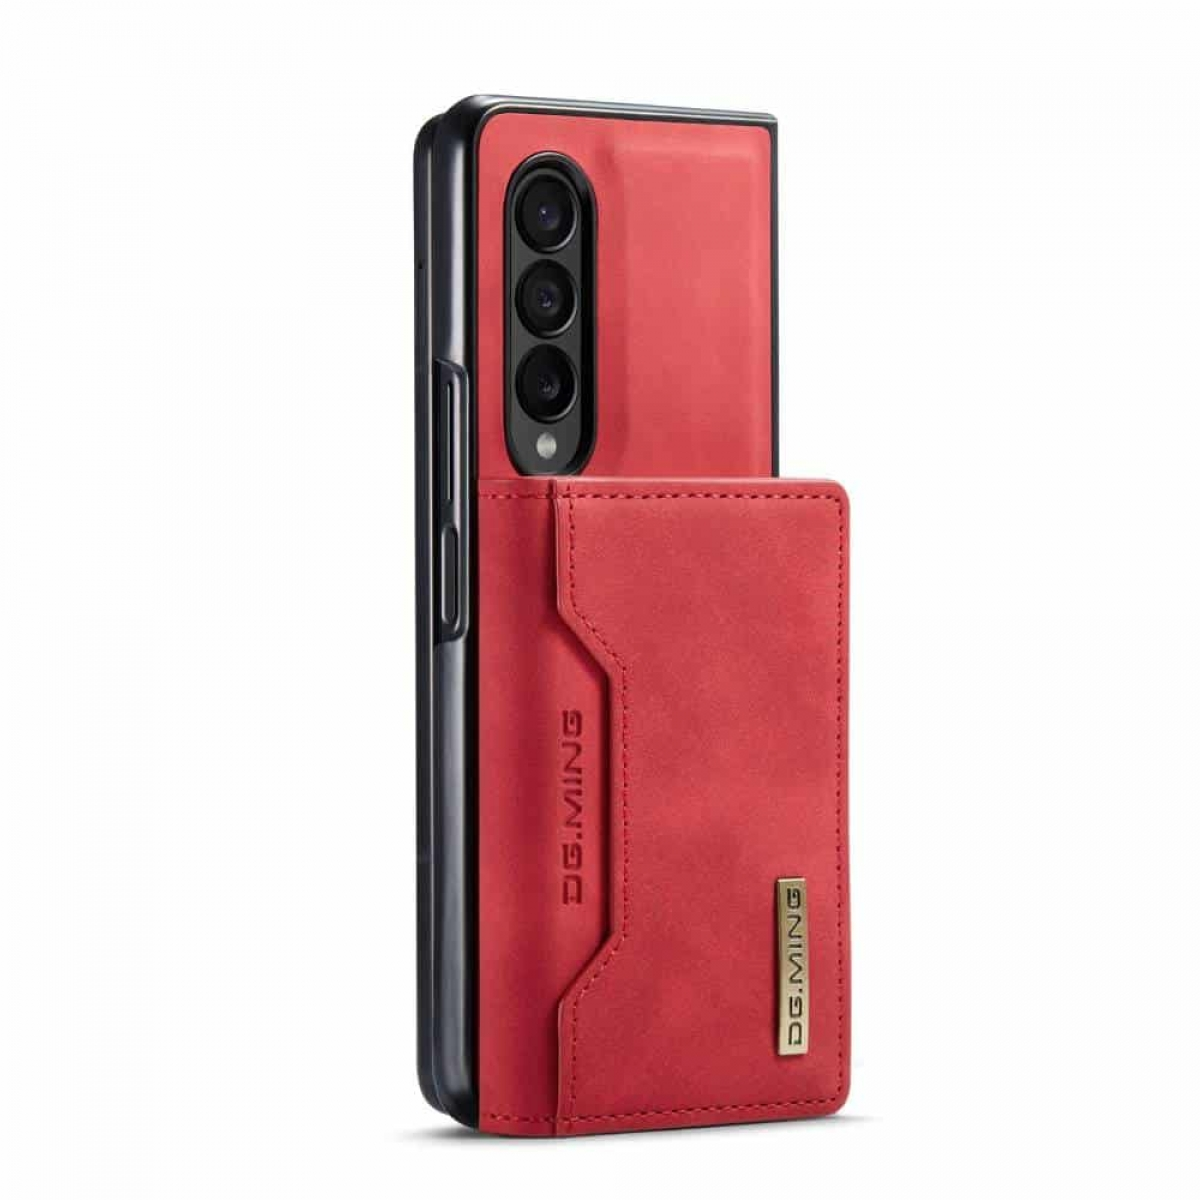 DG MING 2in1, Bookcover, Samsung, Fold Galaxy 5, Rot Z